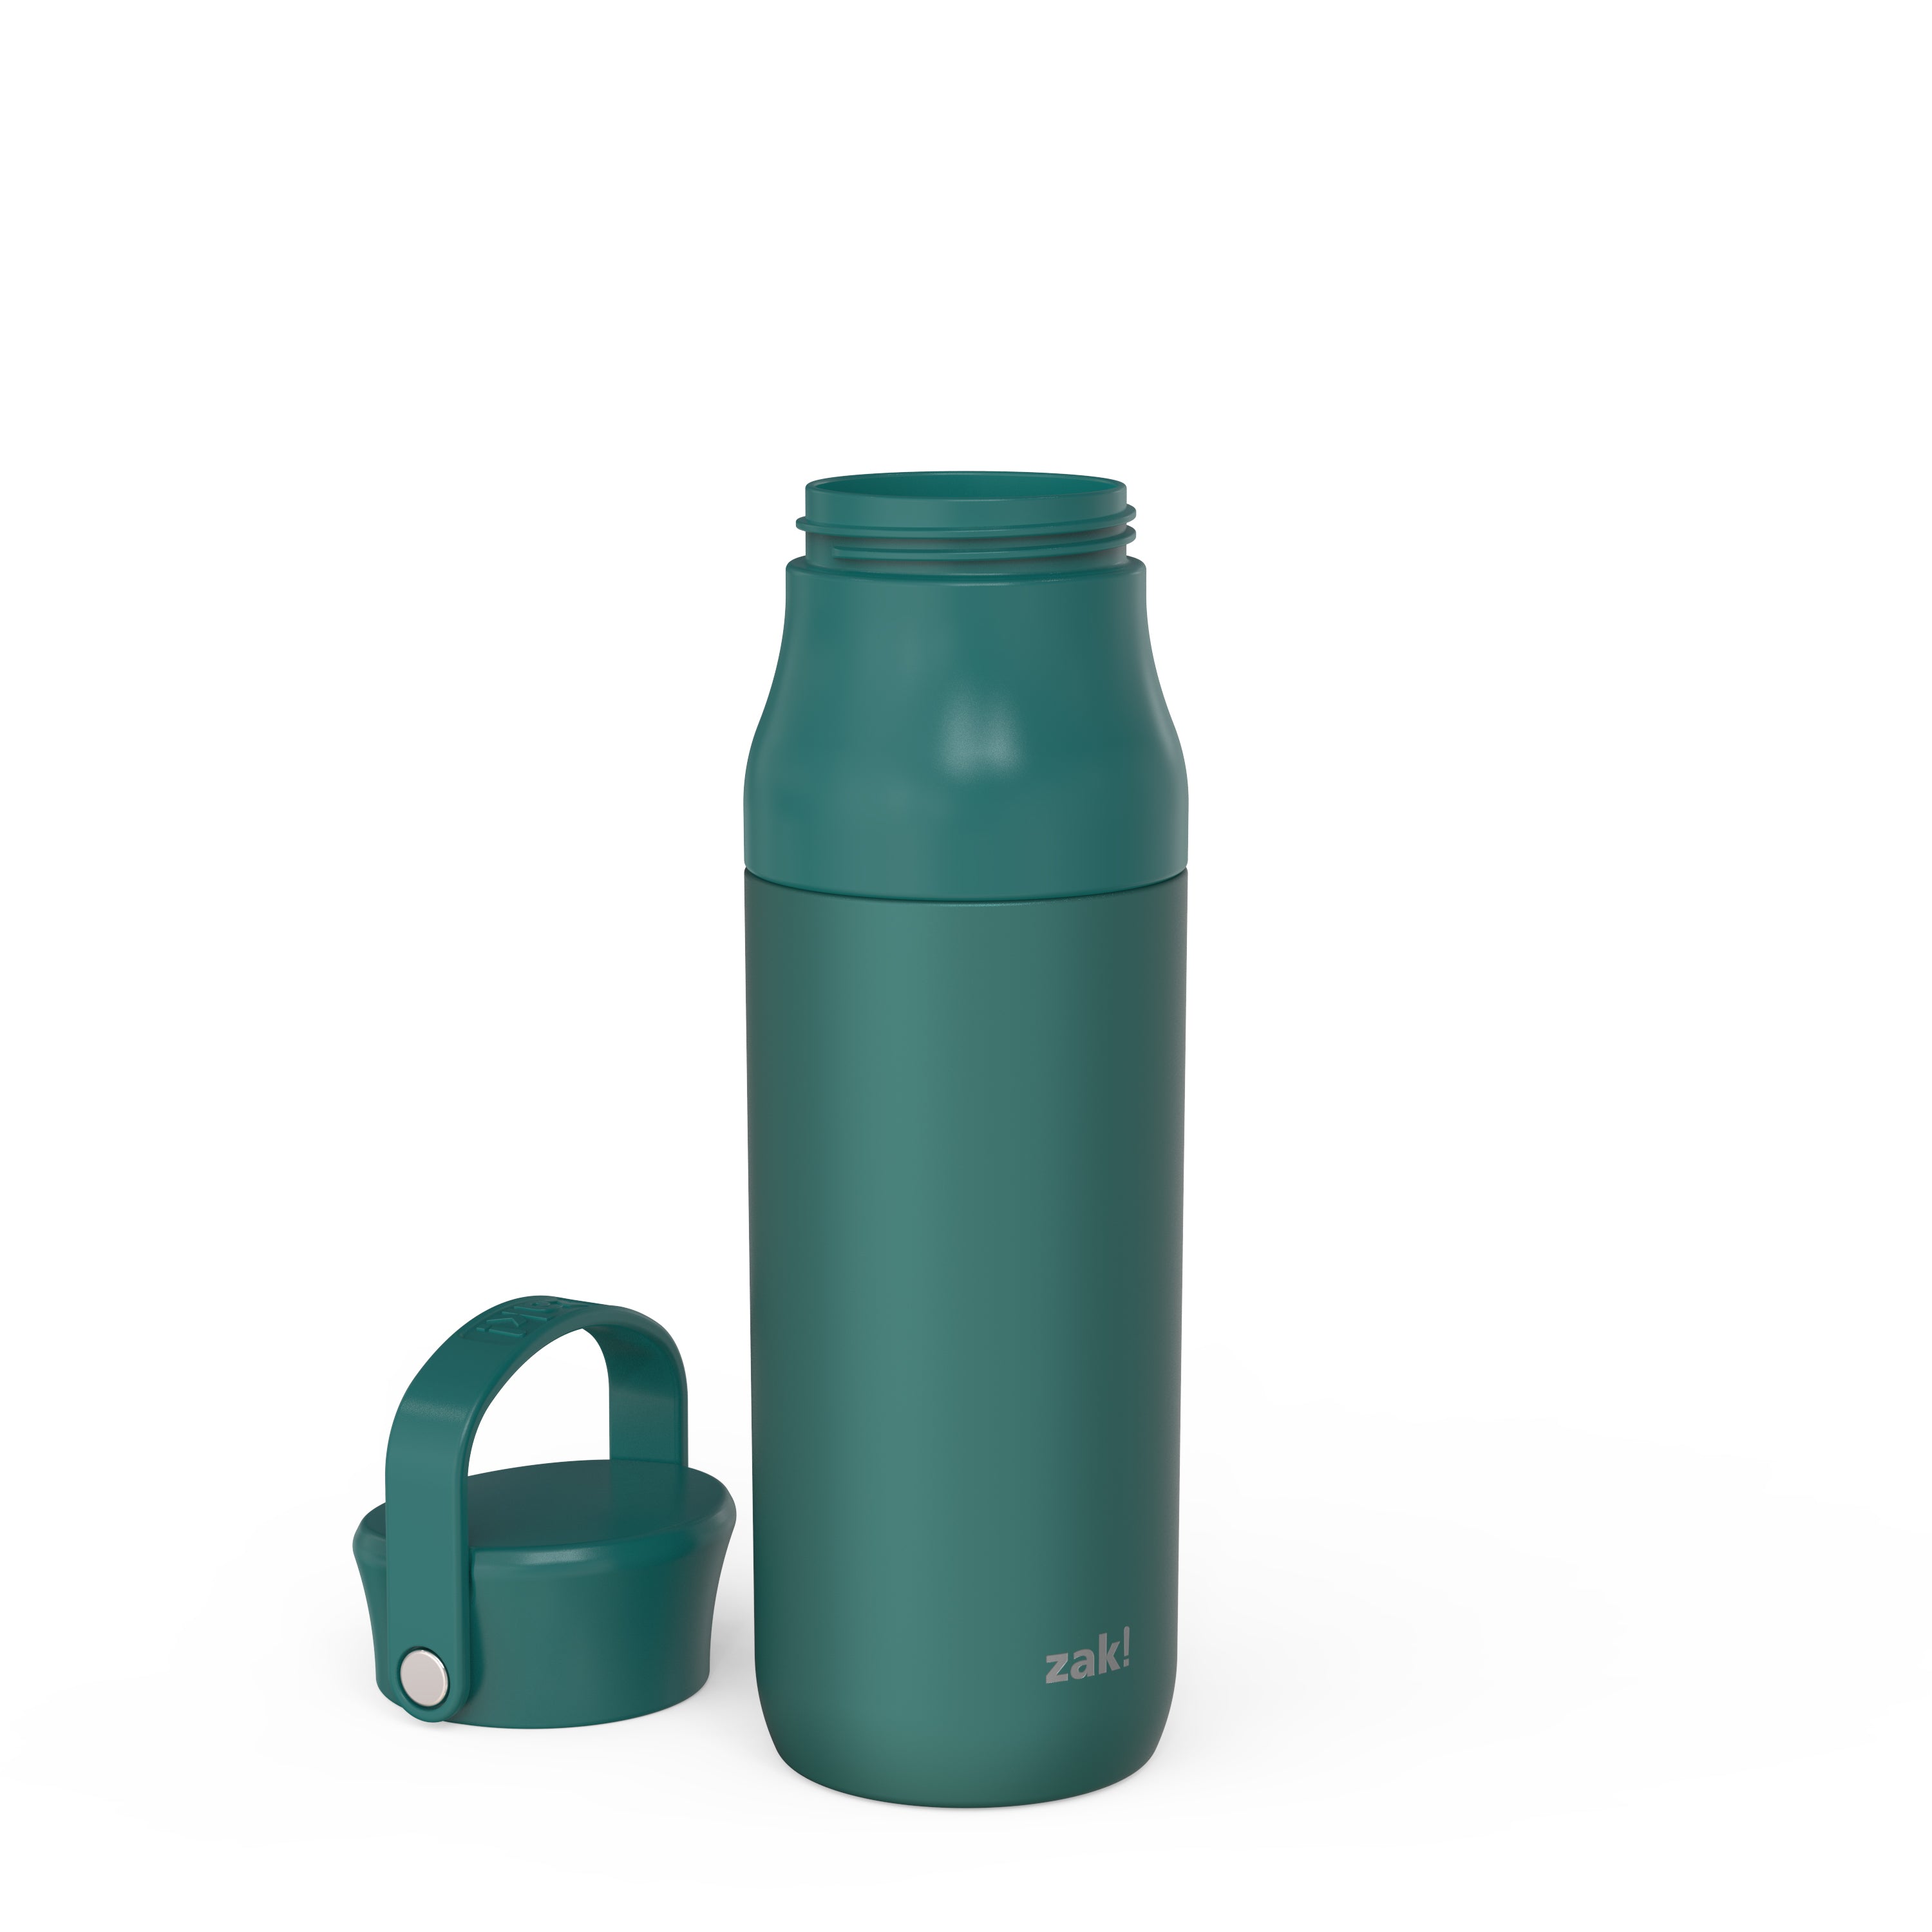 32 oz. Teal Stainless Steel Insulated Water Bottle